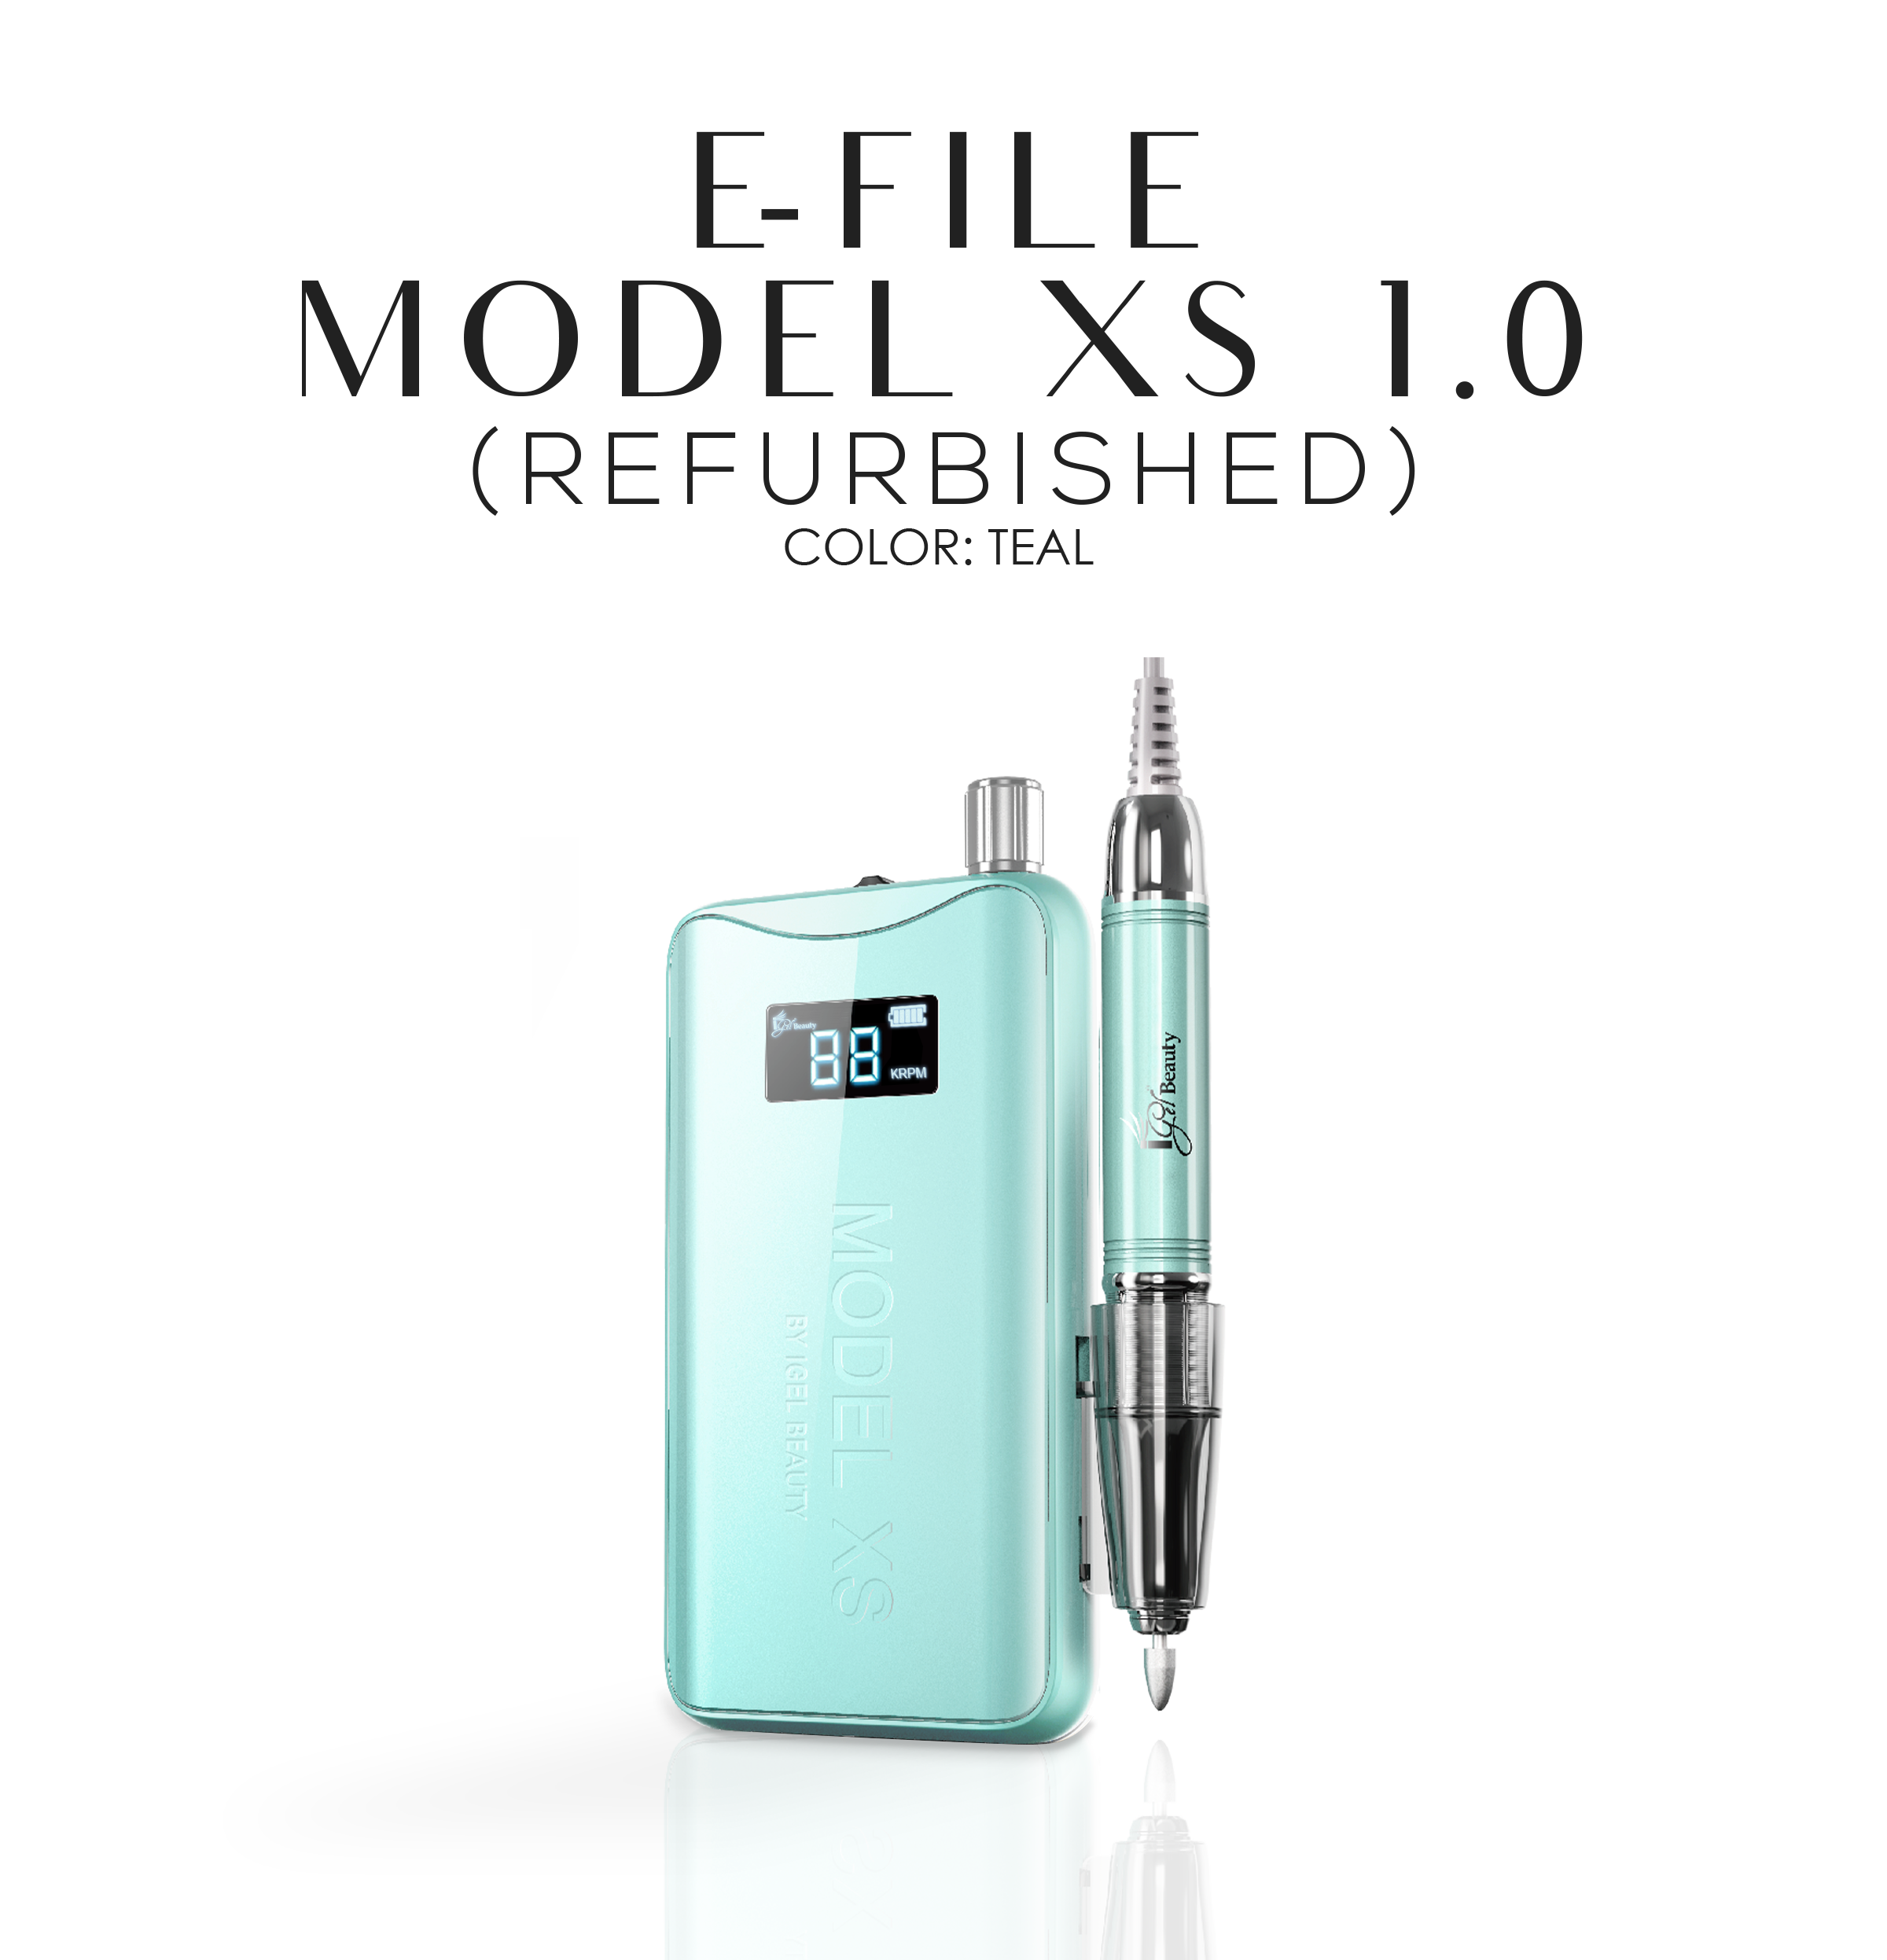 REFURBISHED - MODEL XS 1.0 Wireless Rechargeable E-File - Teal